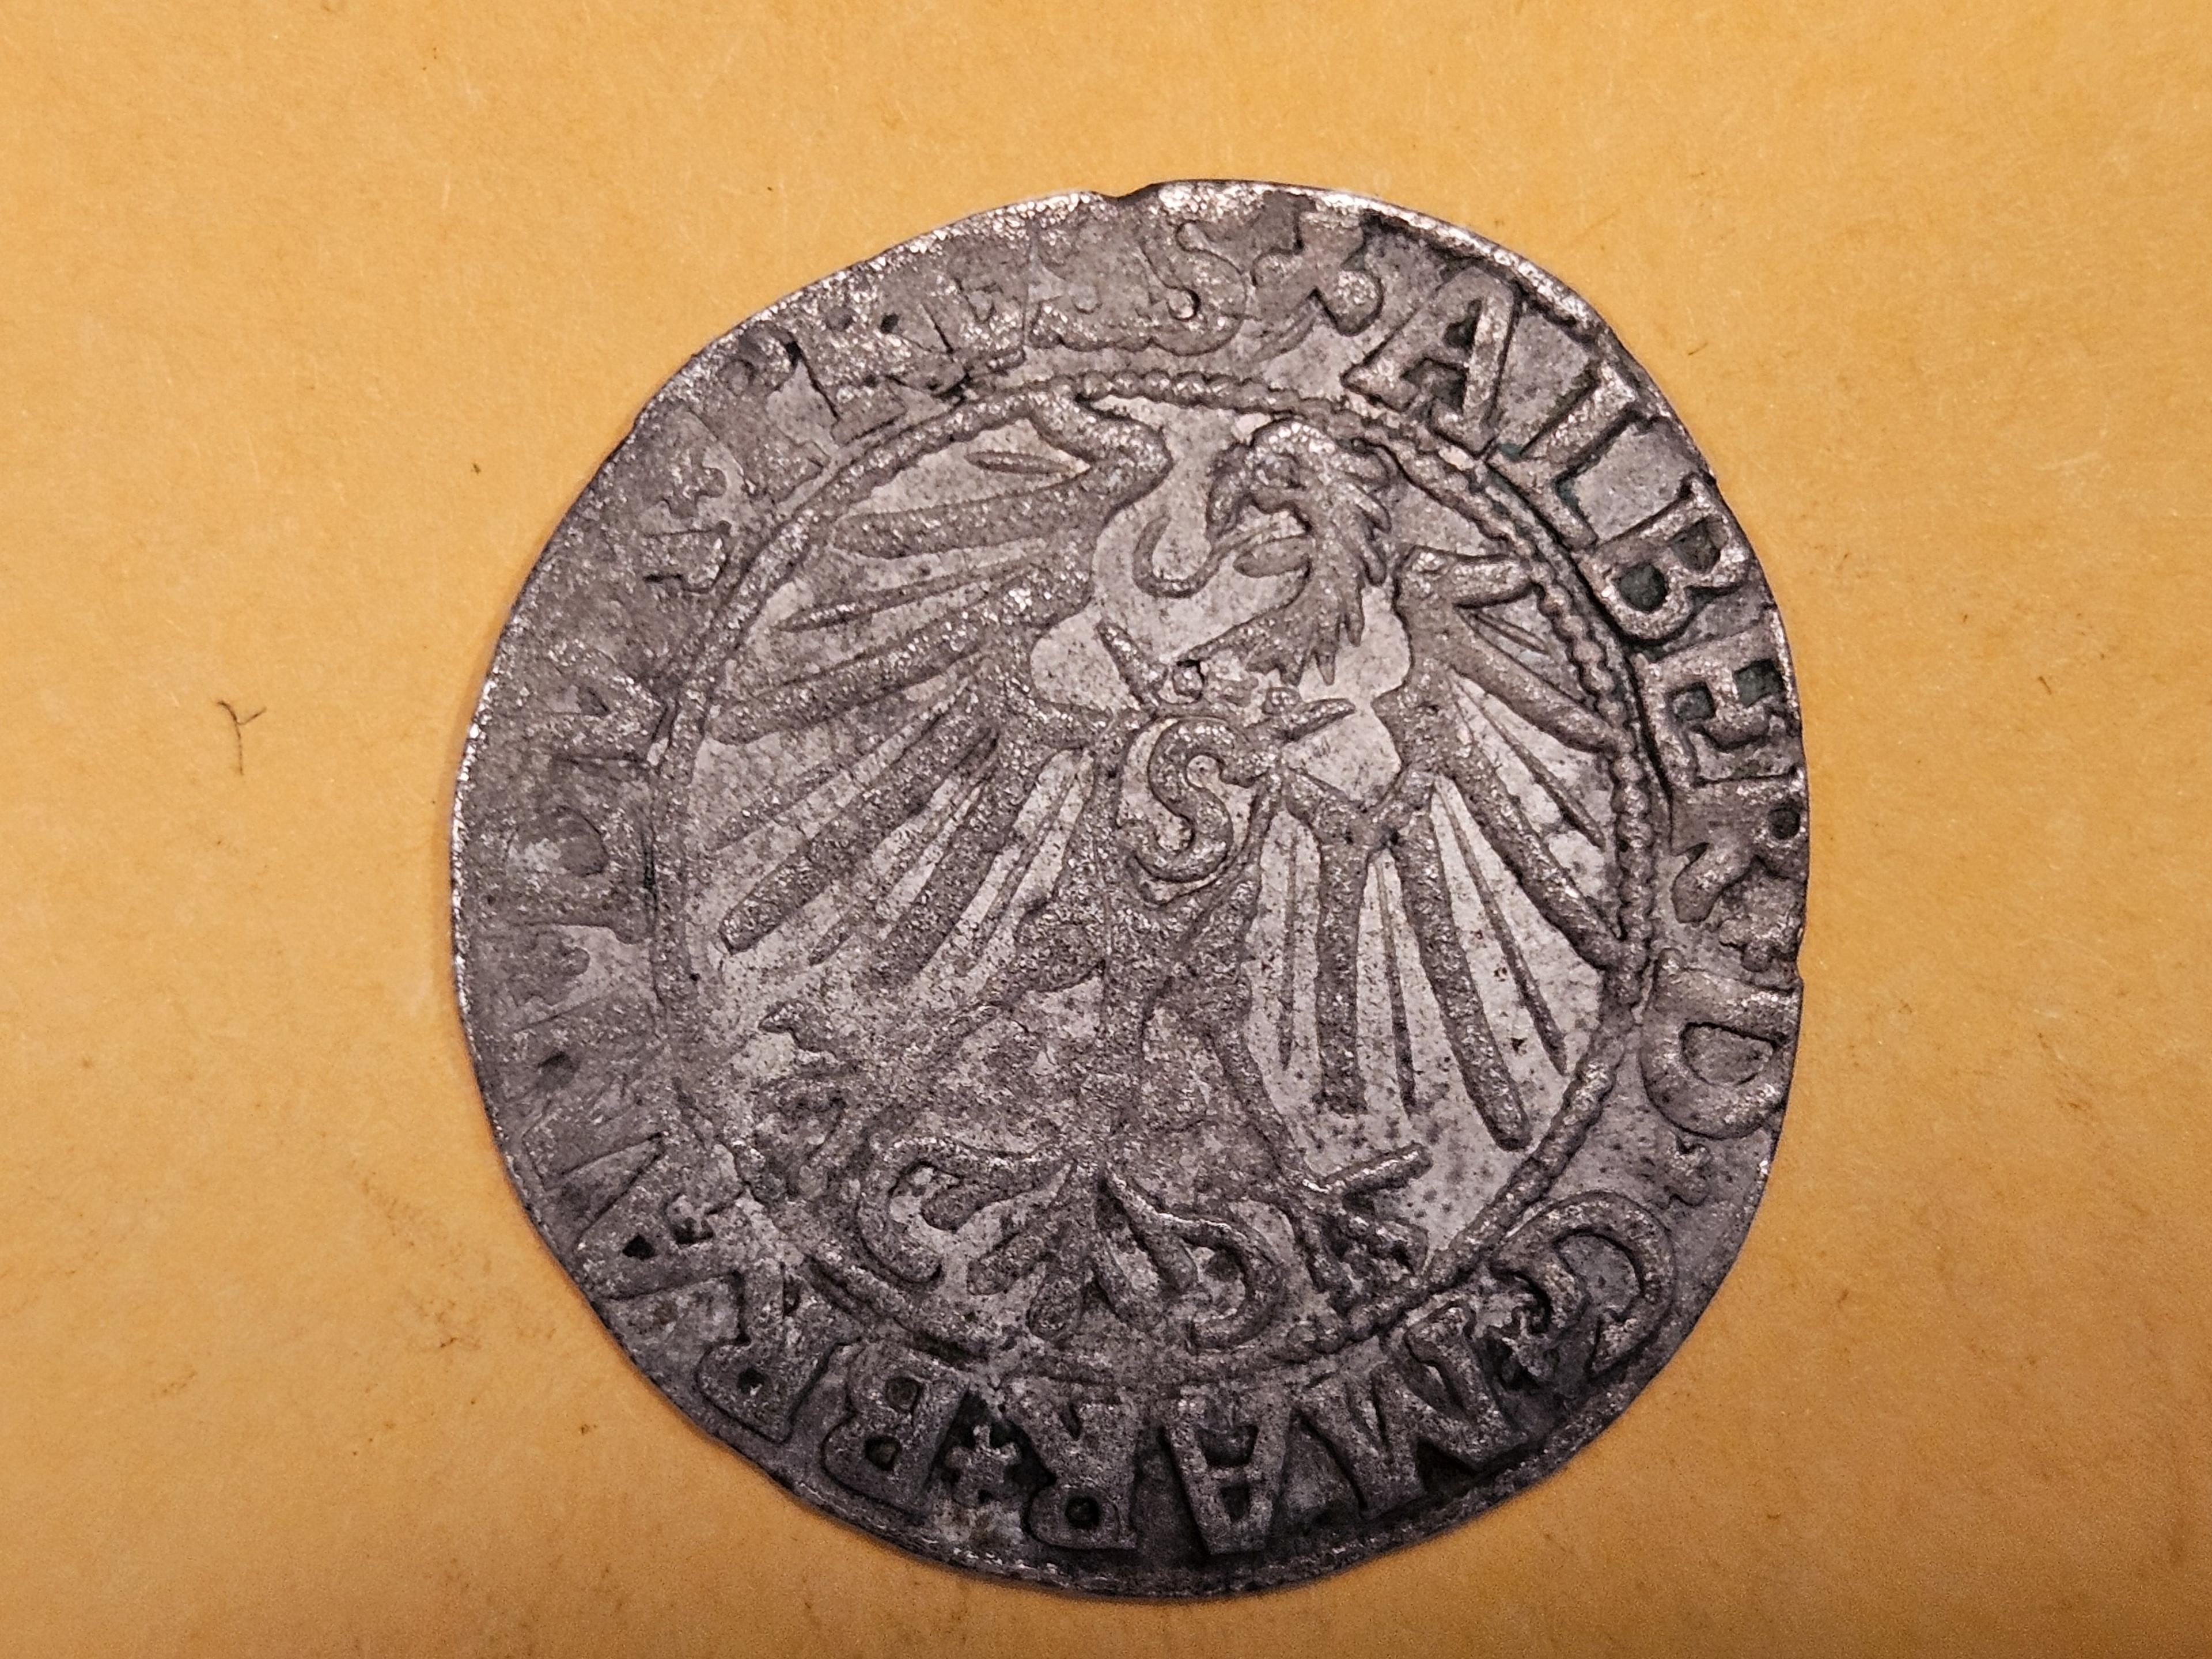 1546 German States silver coin